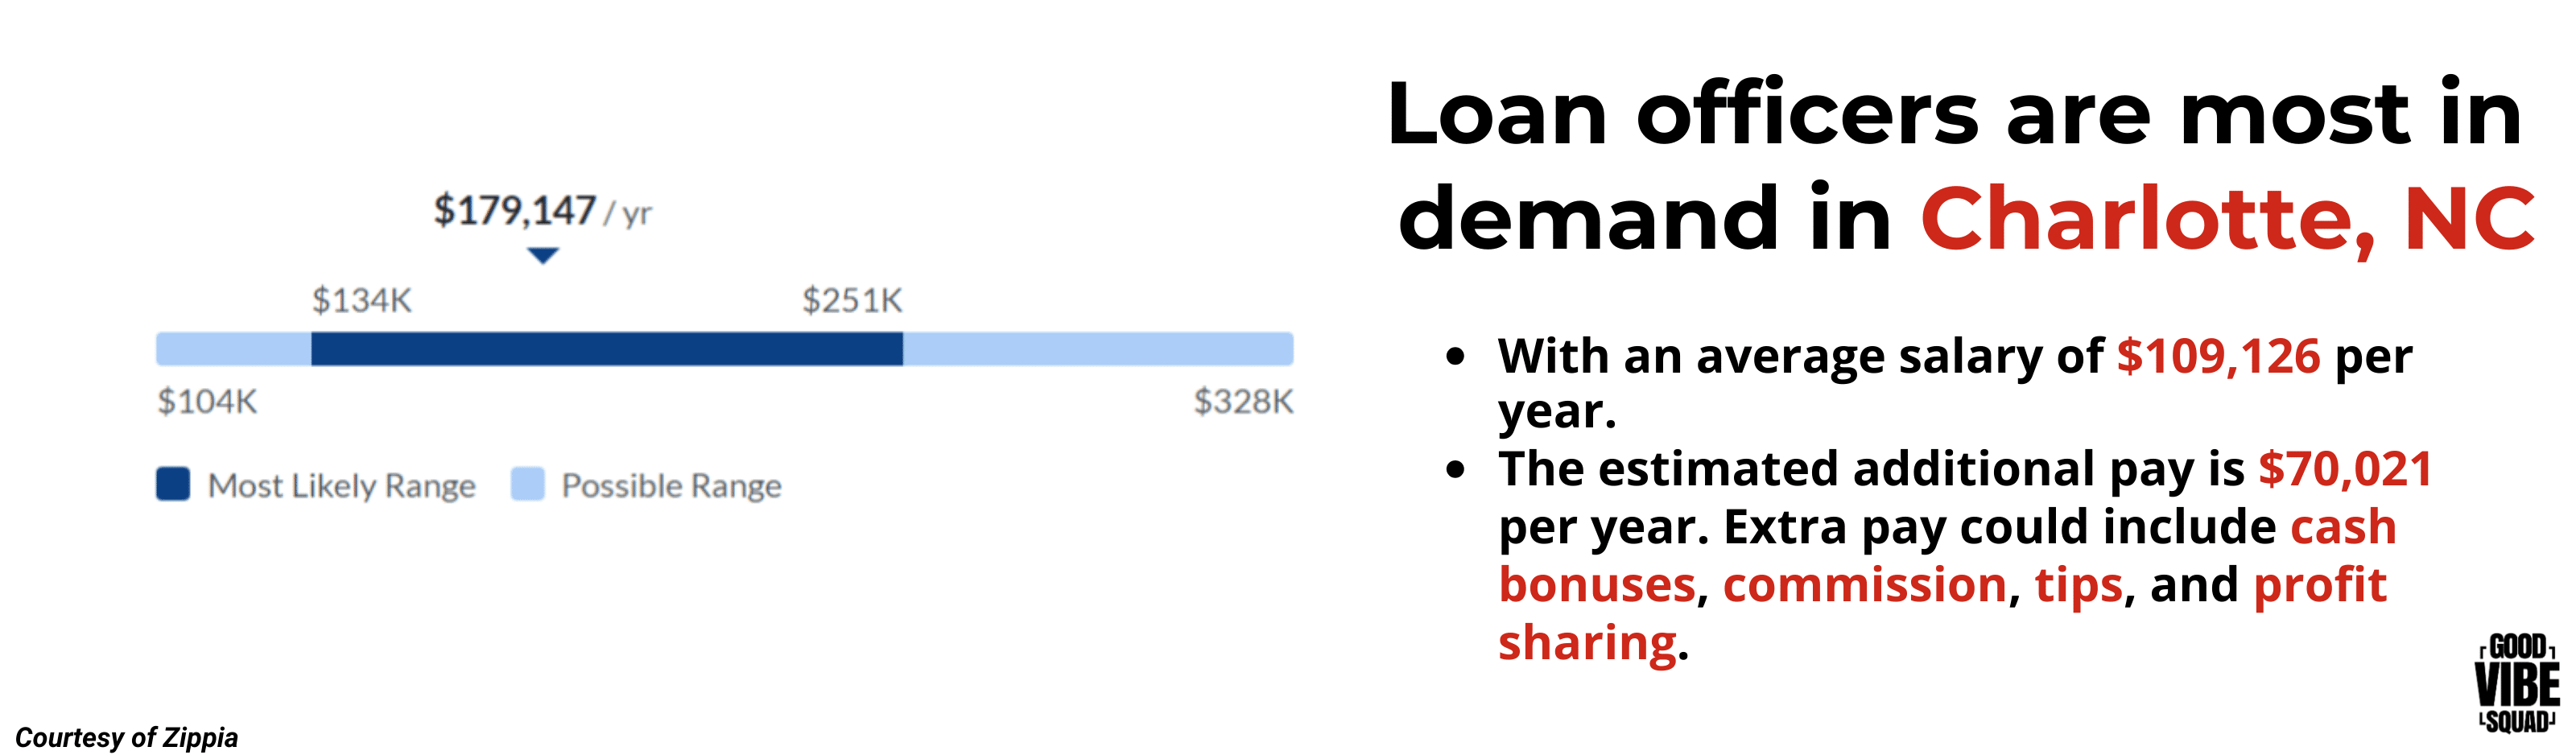 where-are-loan-officers-most-in-demand-body